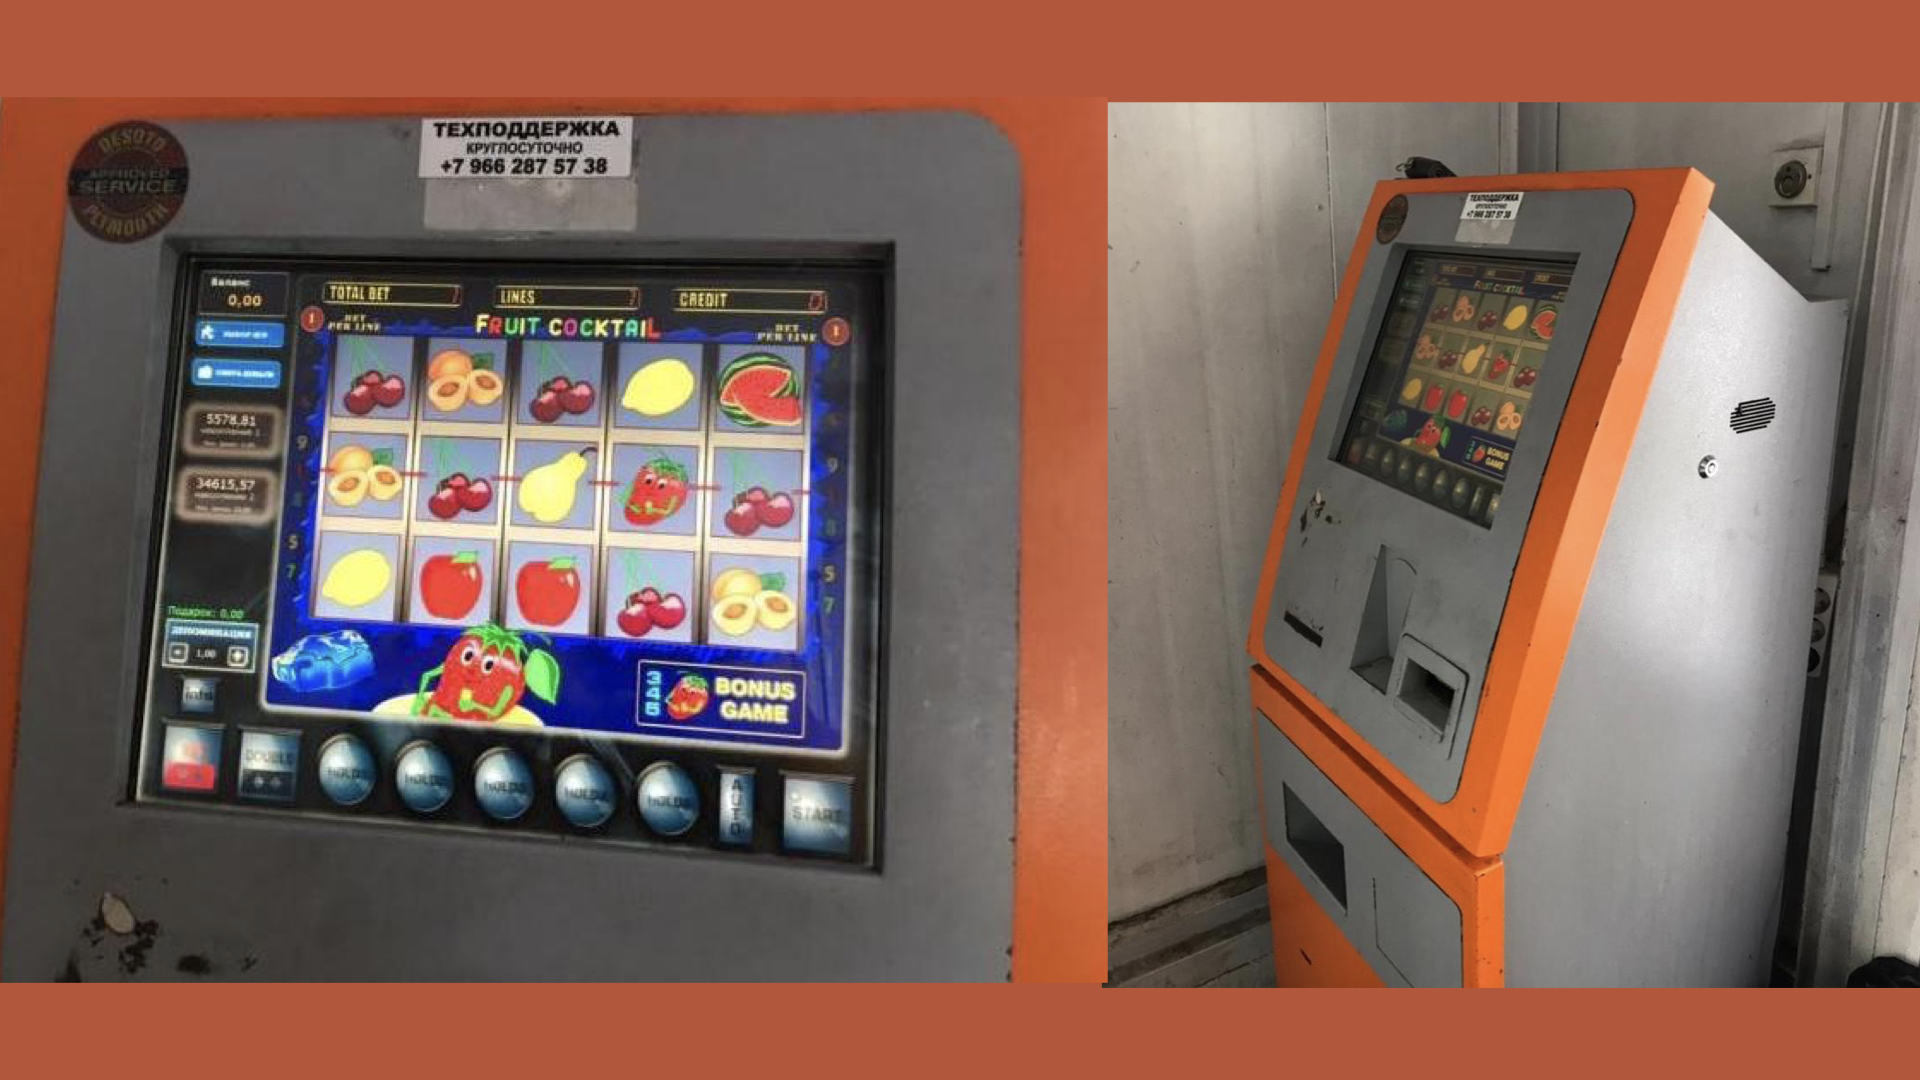 Illegal slot machines disguised as payment terminals in Primorye